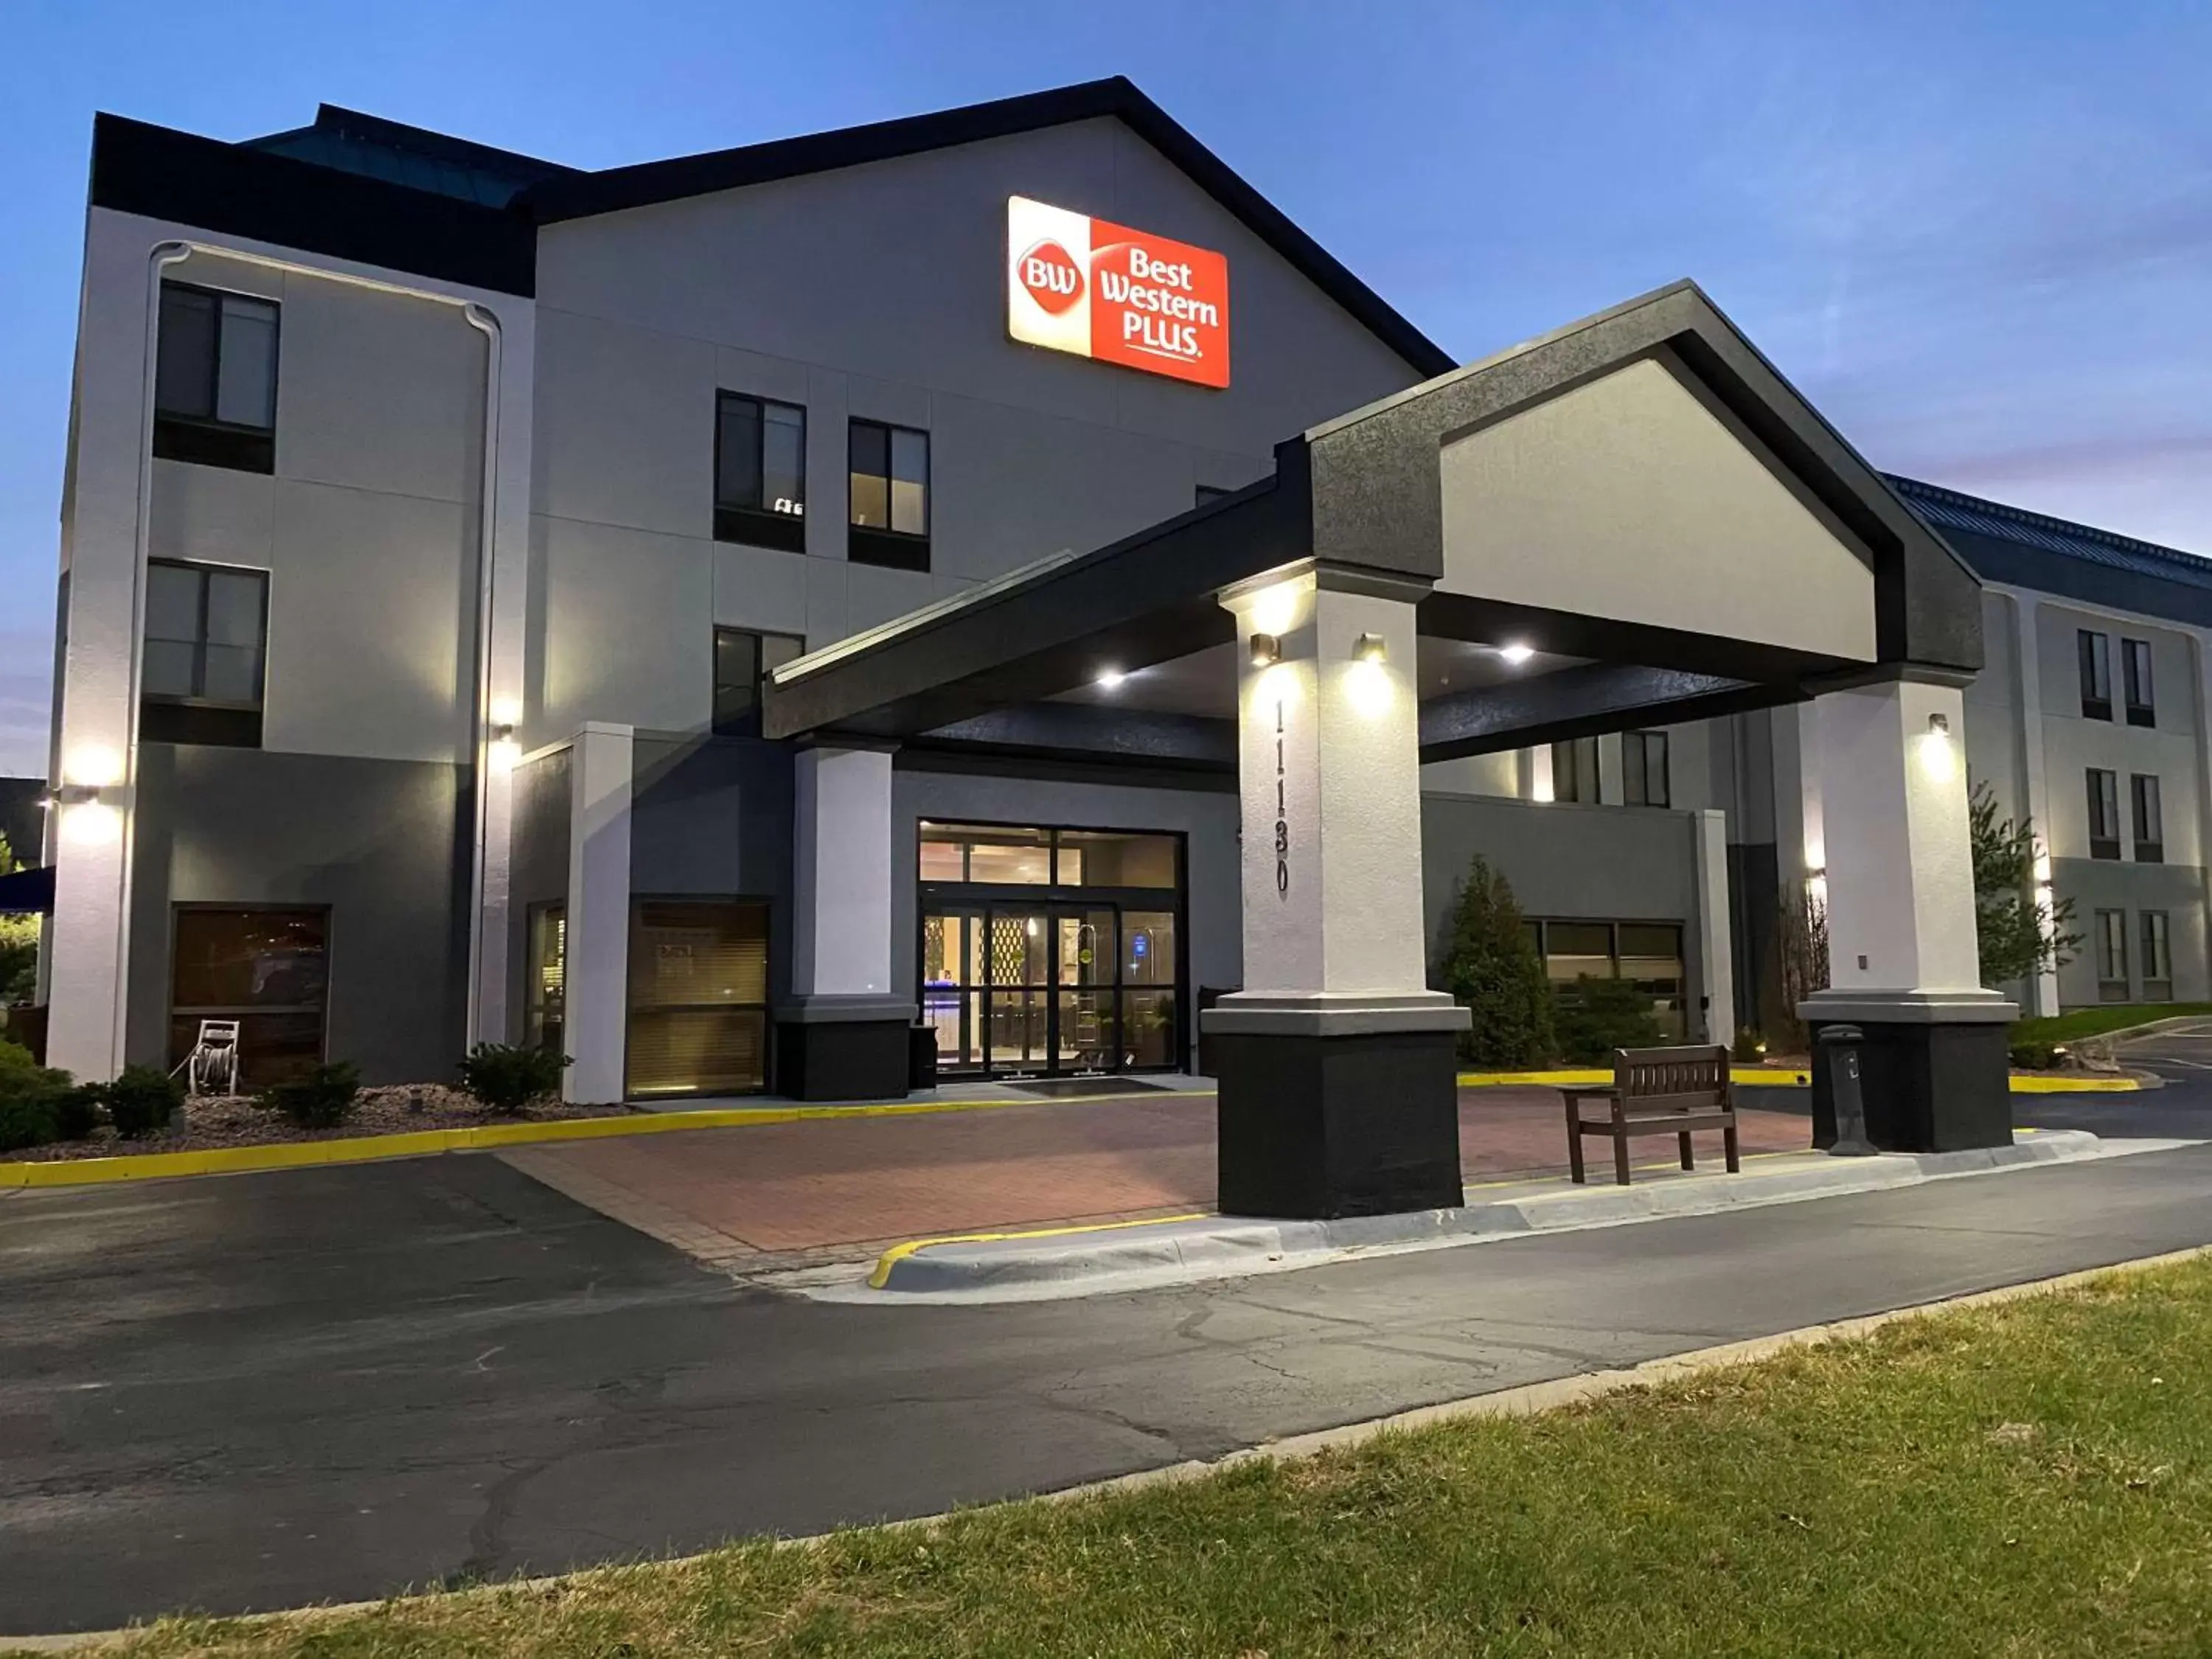 Property Building in Best Western Plus Kansas City Airport - KCI East